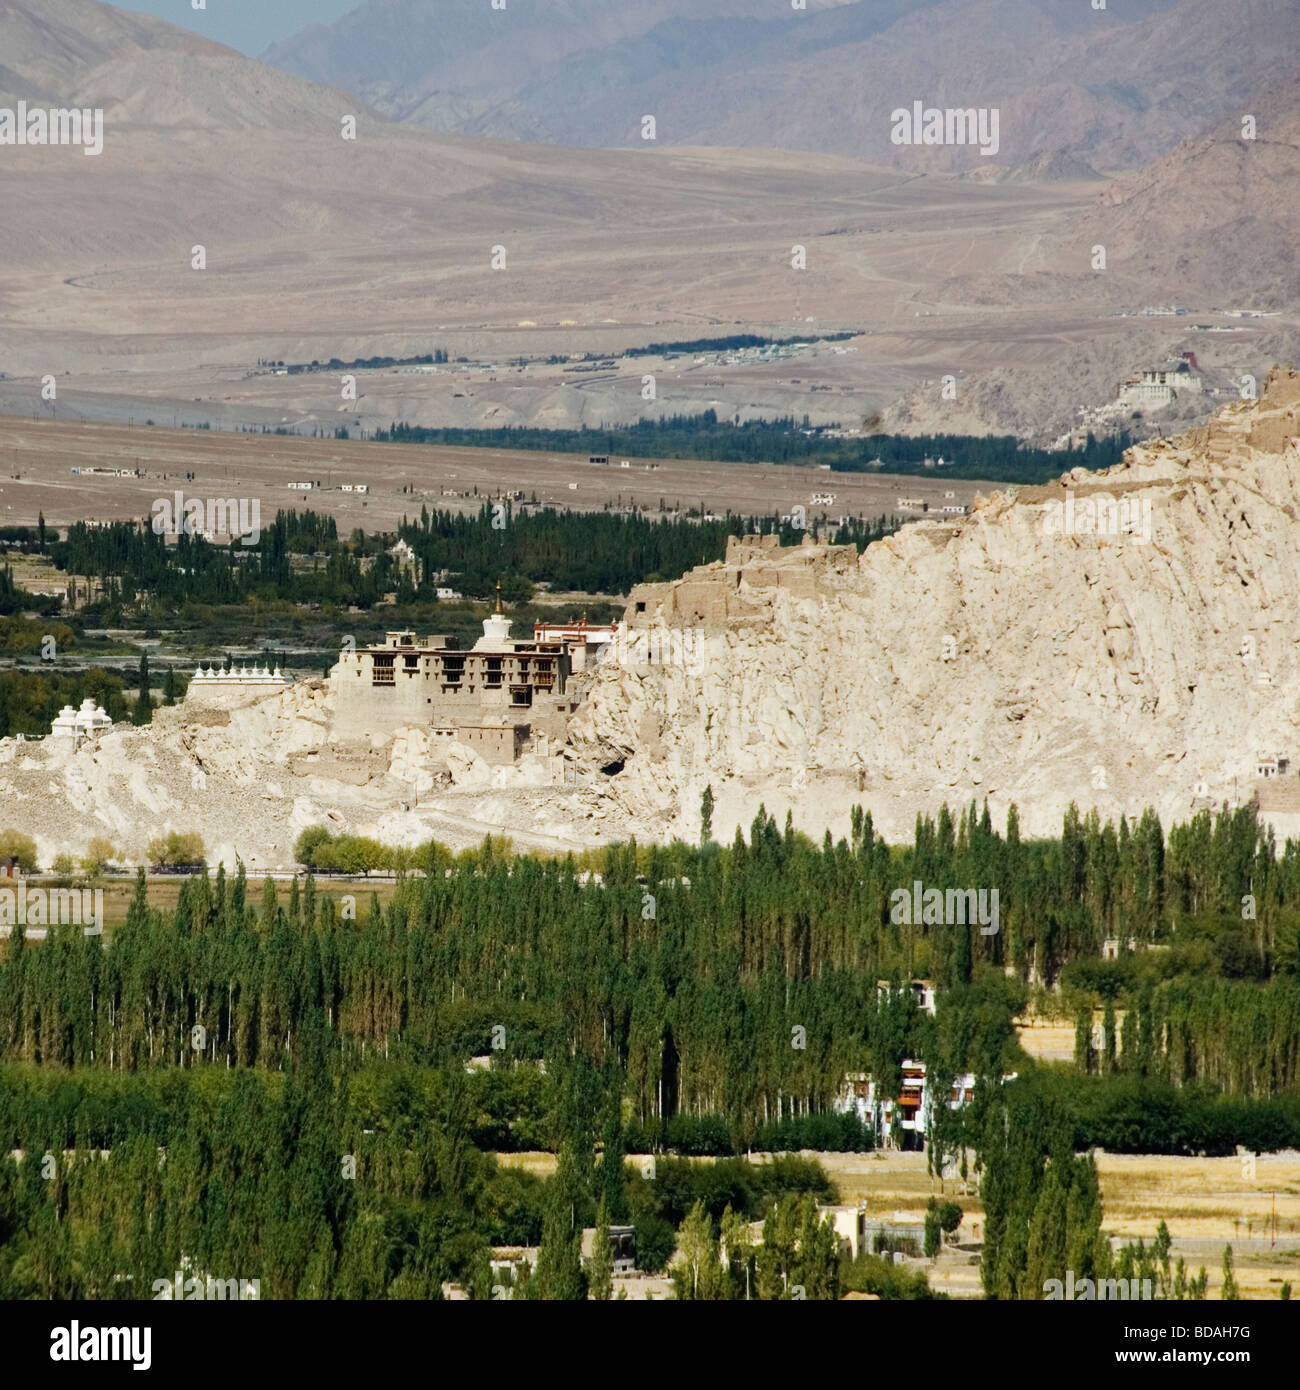 Trees in front of a palace, Shey Palace, Shey, Ladakh, Jammu and Kashmir, India Stock Photo